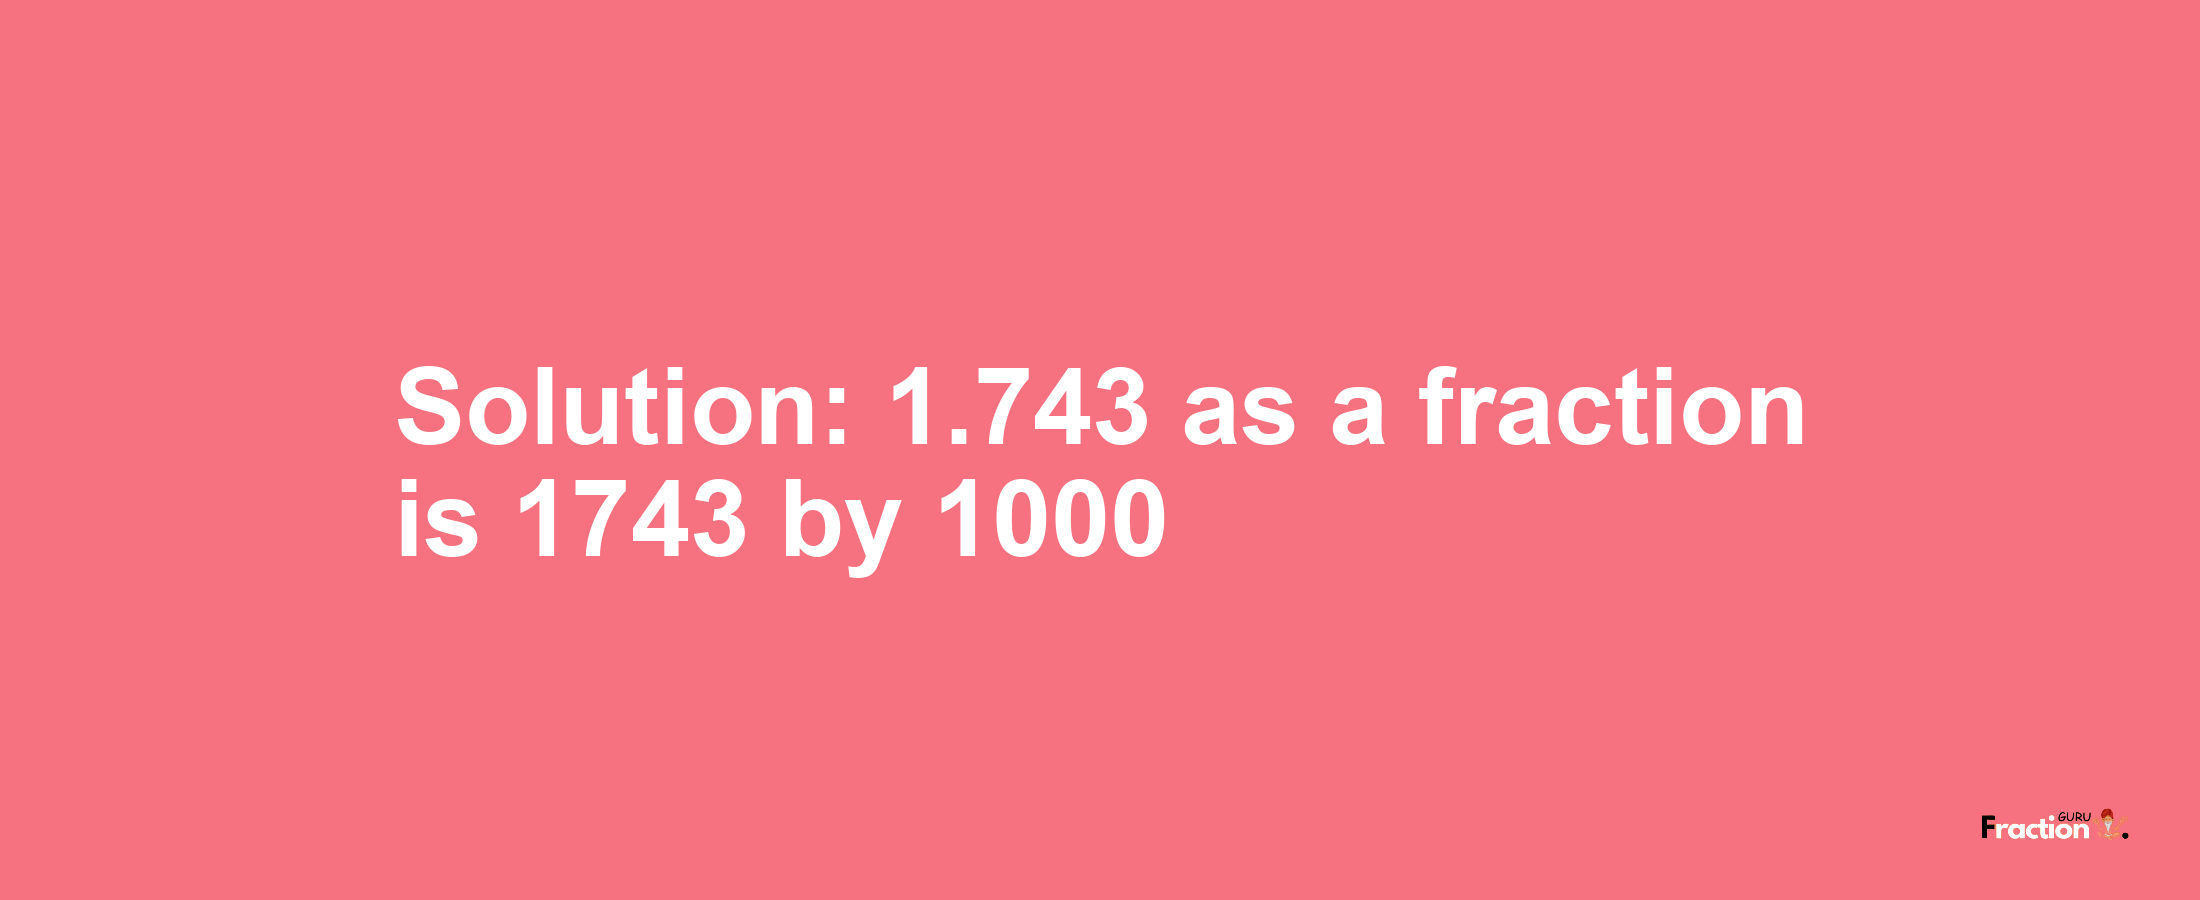 Solution:1.743 as a fraction is 1743/1000